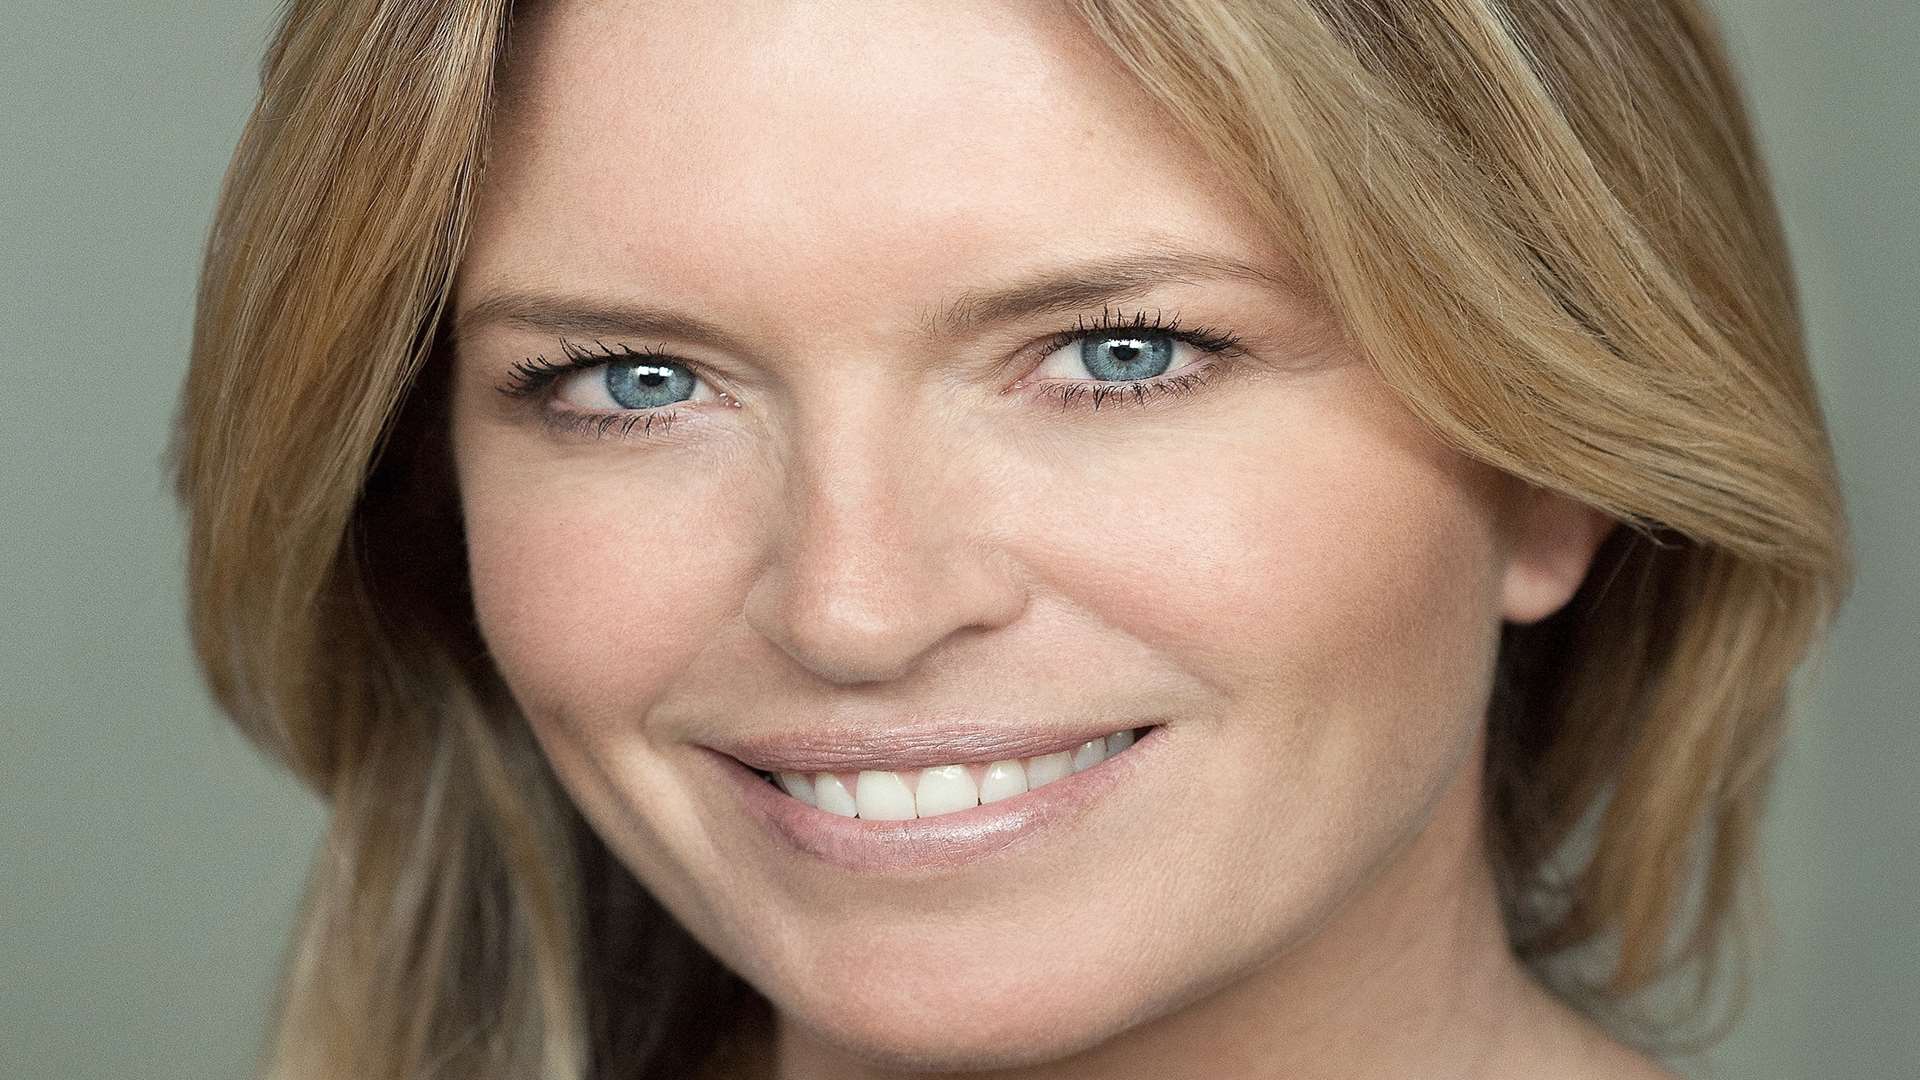 Tina Hobley plays the part of Ashley Harper